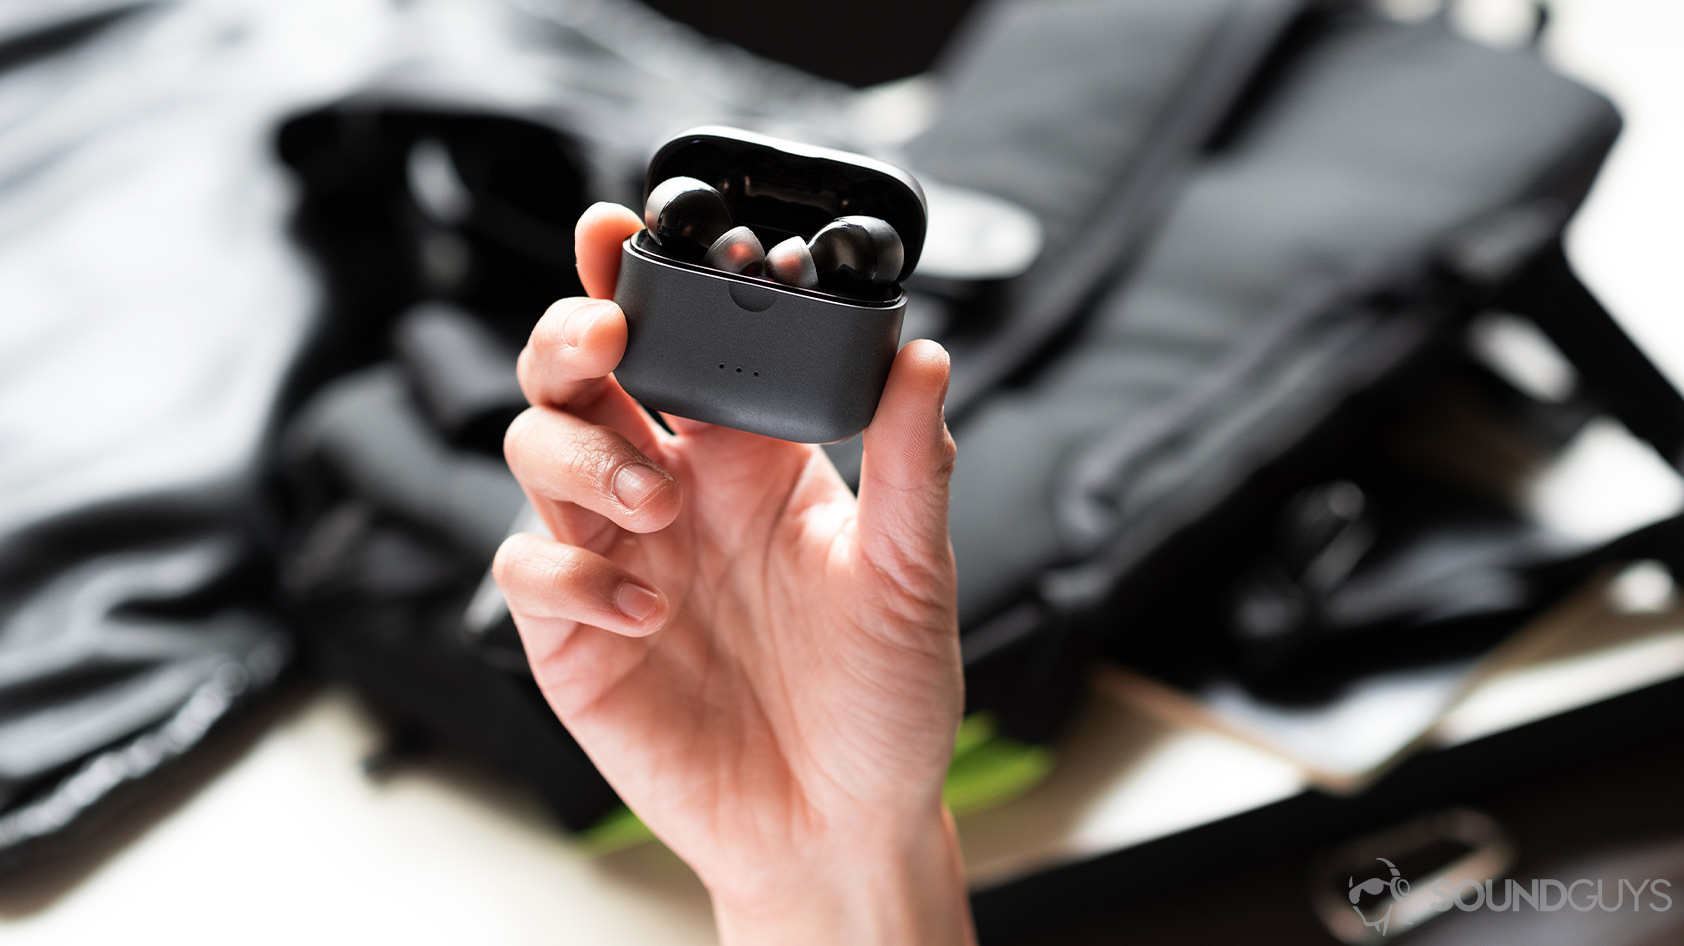 Anker SoundCore Liberty Air 2 true wireless earbuds in the open case, which is held on display in a woman's hand.